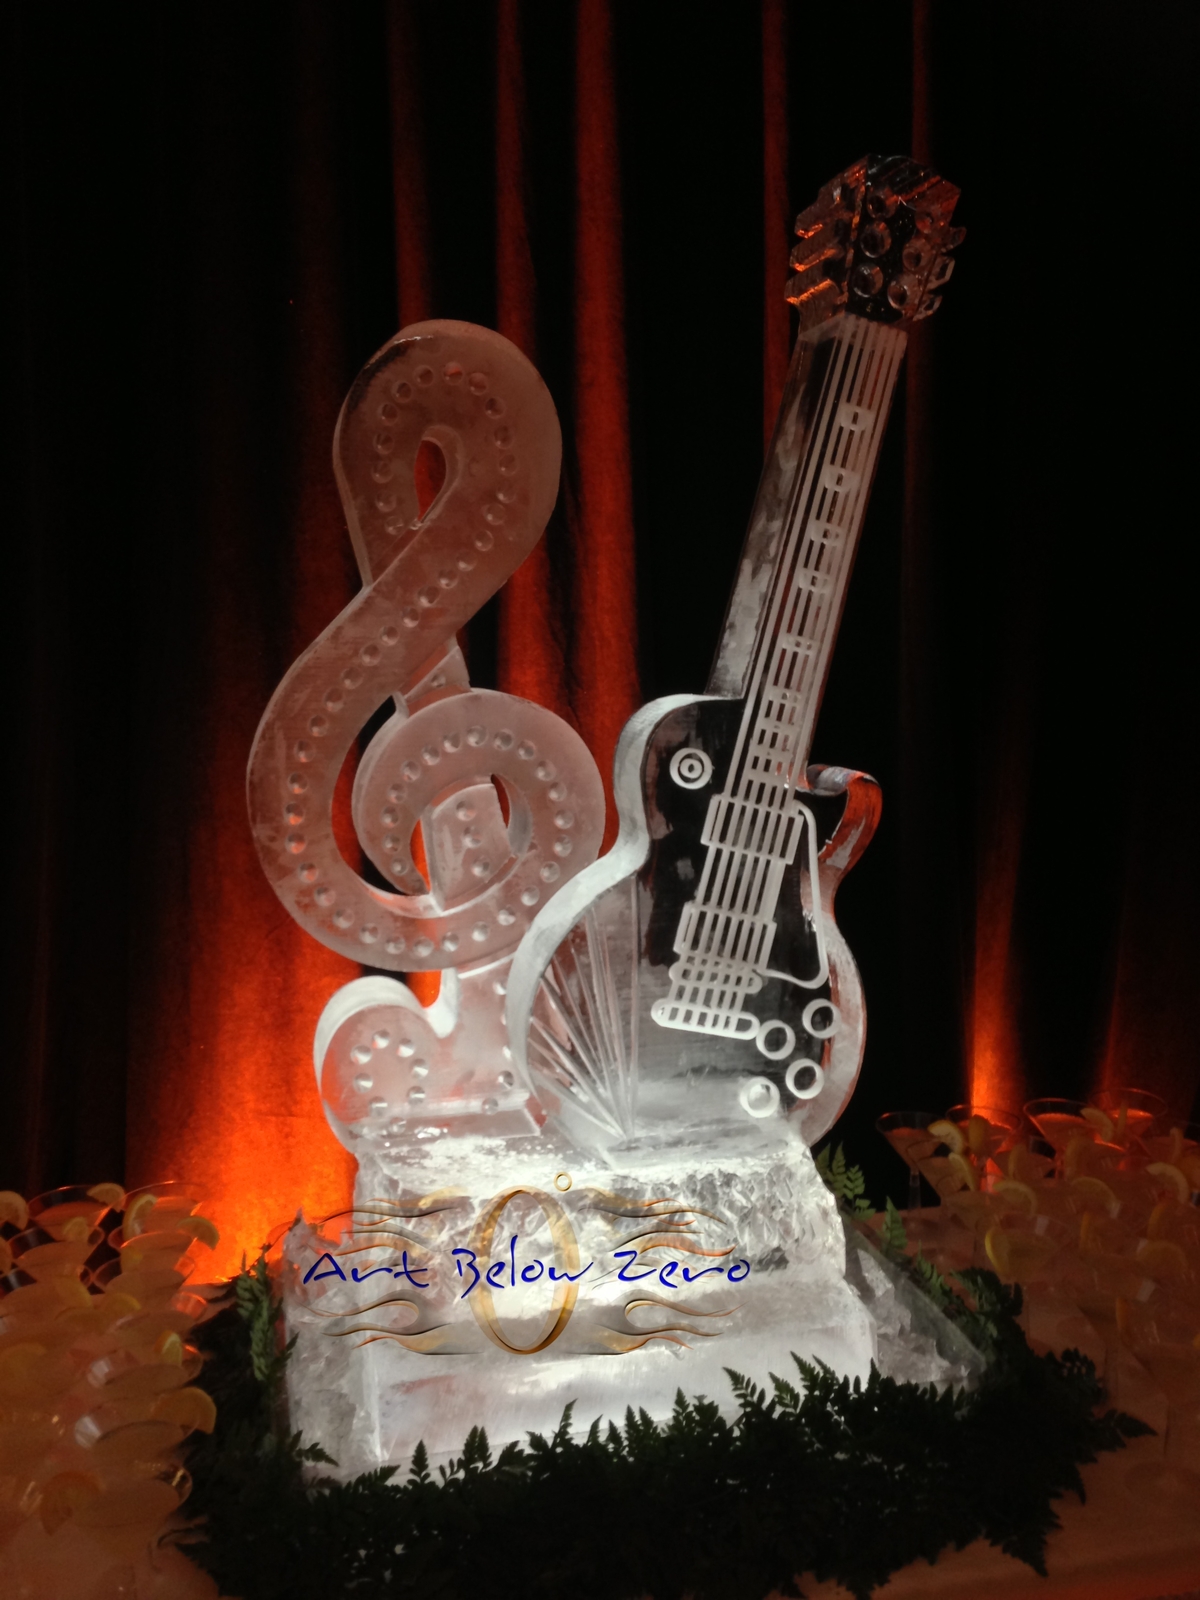 Les_paul_guitar_ice_sculpture_at_the_opening_of_the_museum_exhibit_in_waukesha_